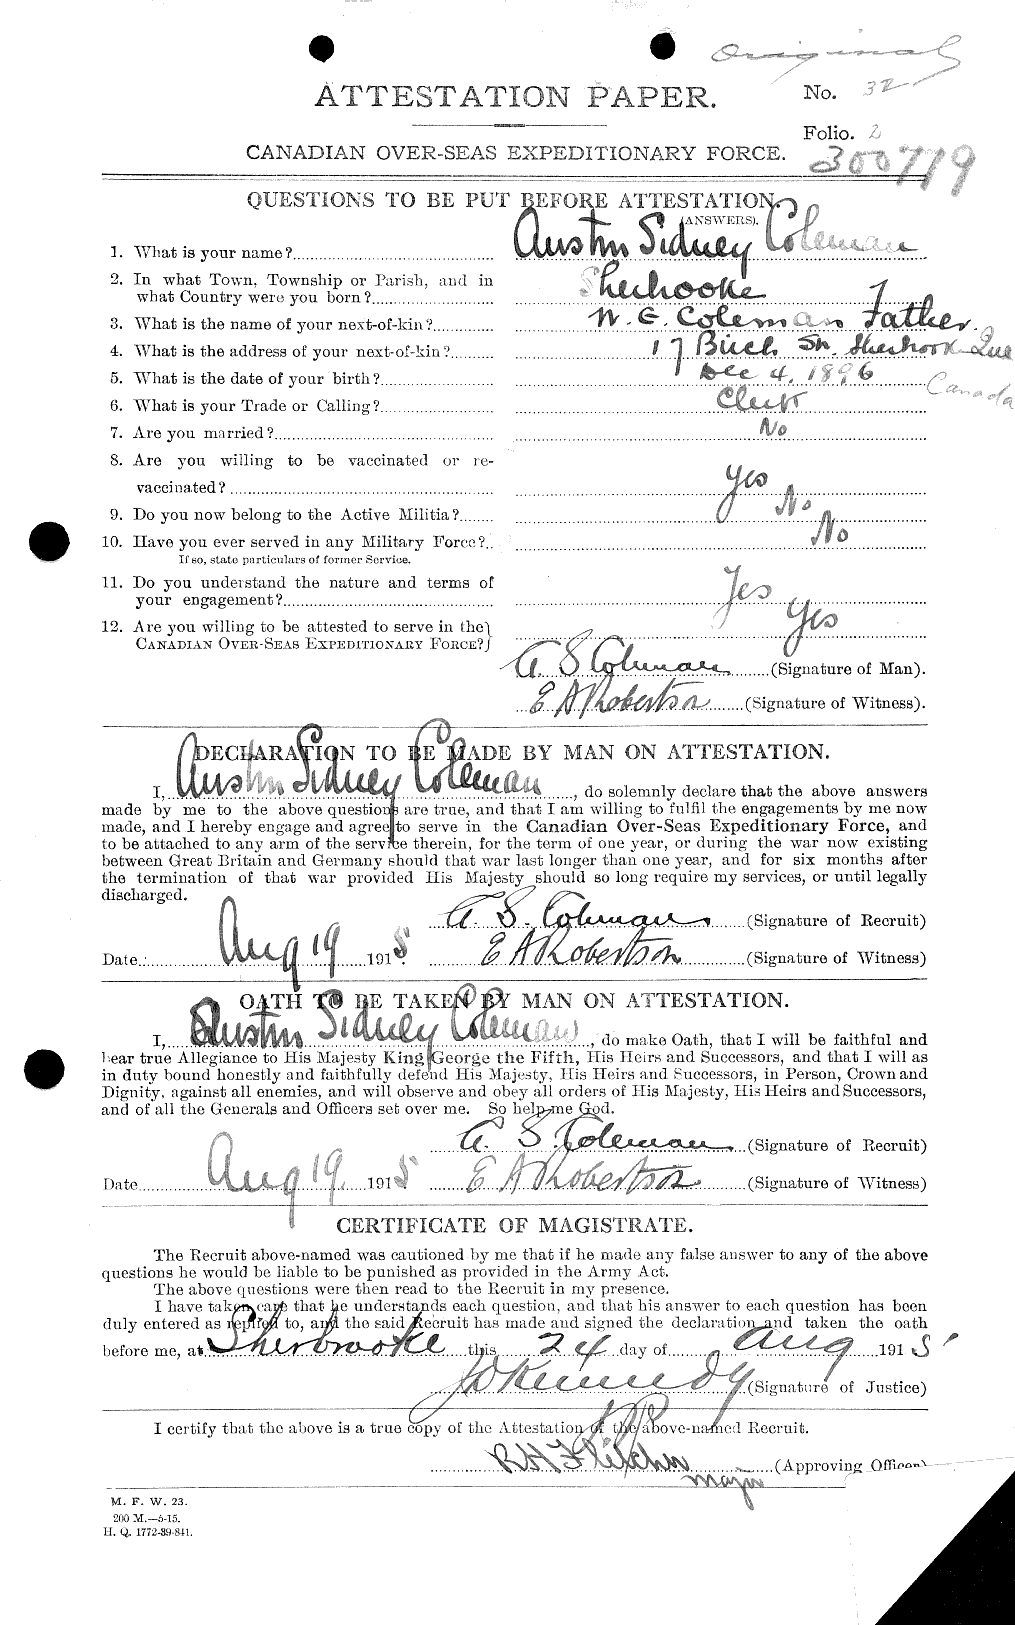 Personnel Records of the First World War - CEF 028068a